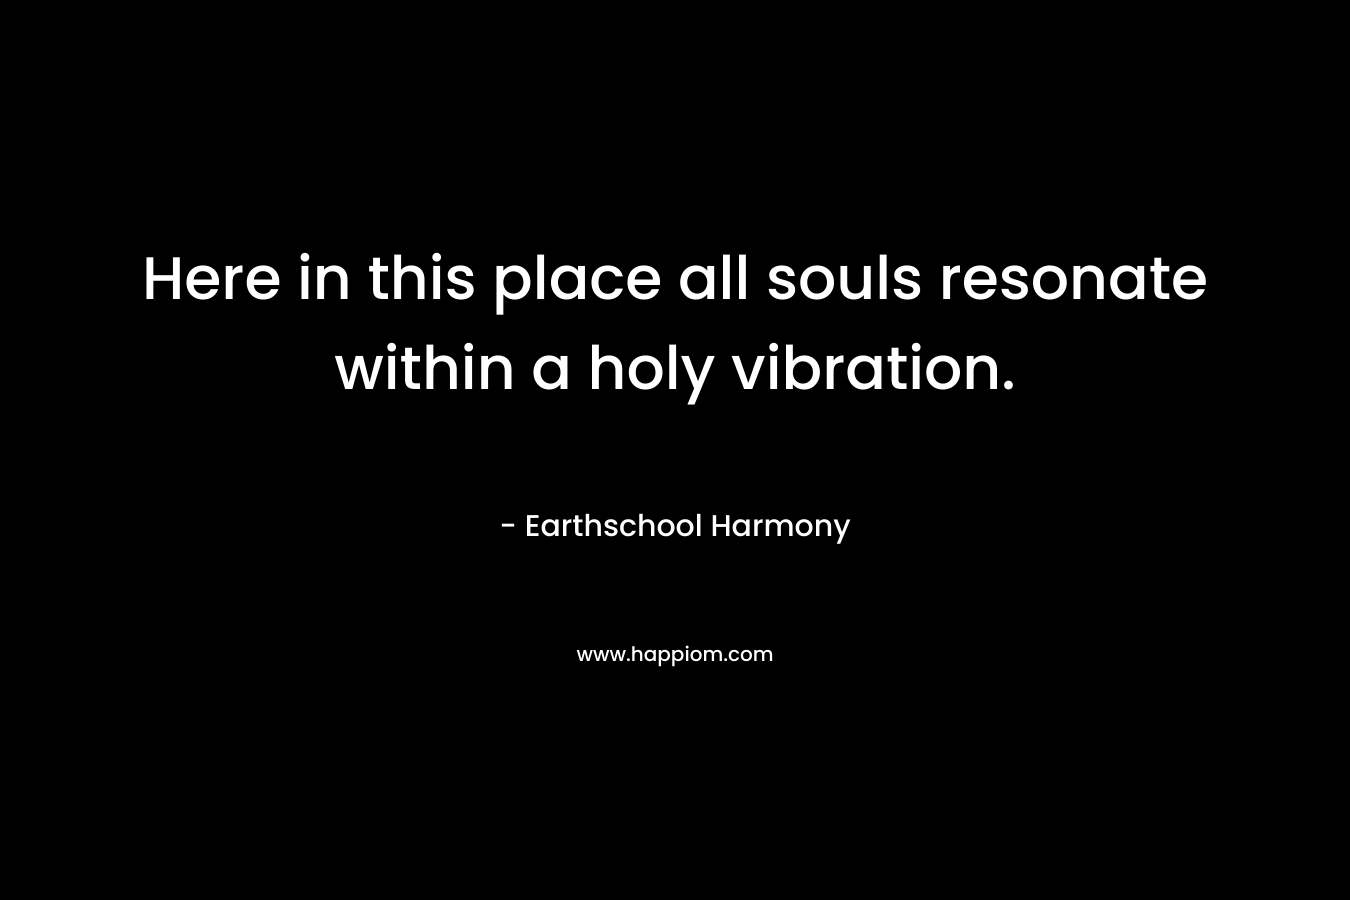 Here in this place all souls resonate within a holy vibration. – Earthschool Harmony